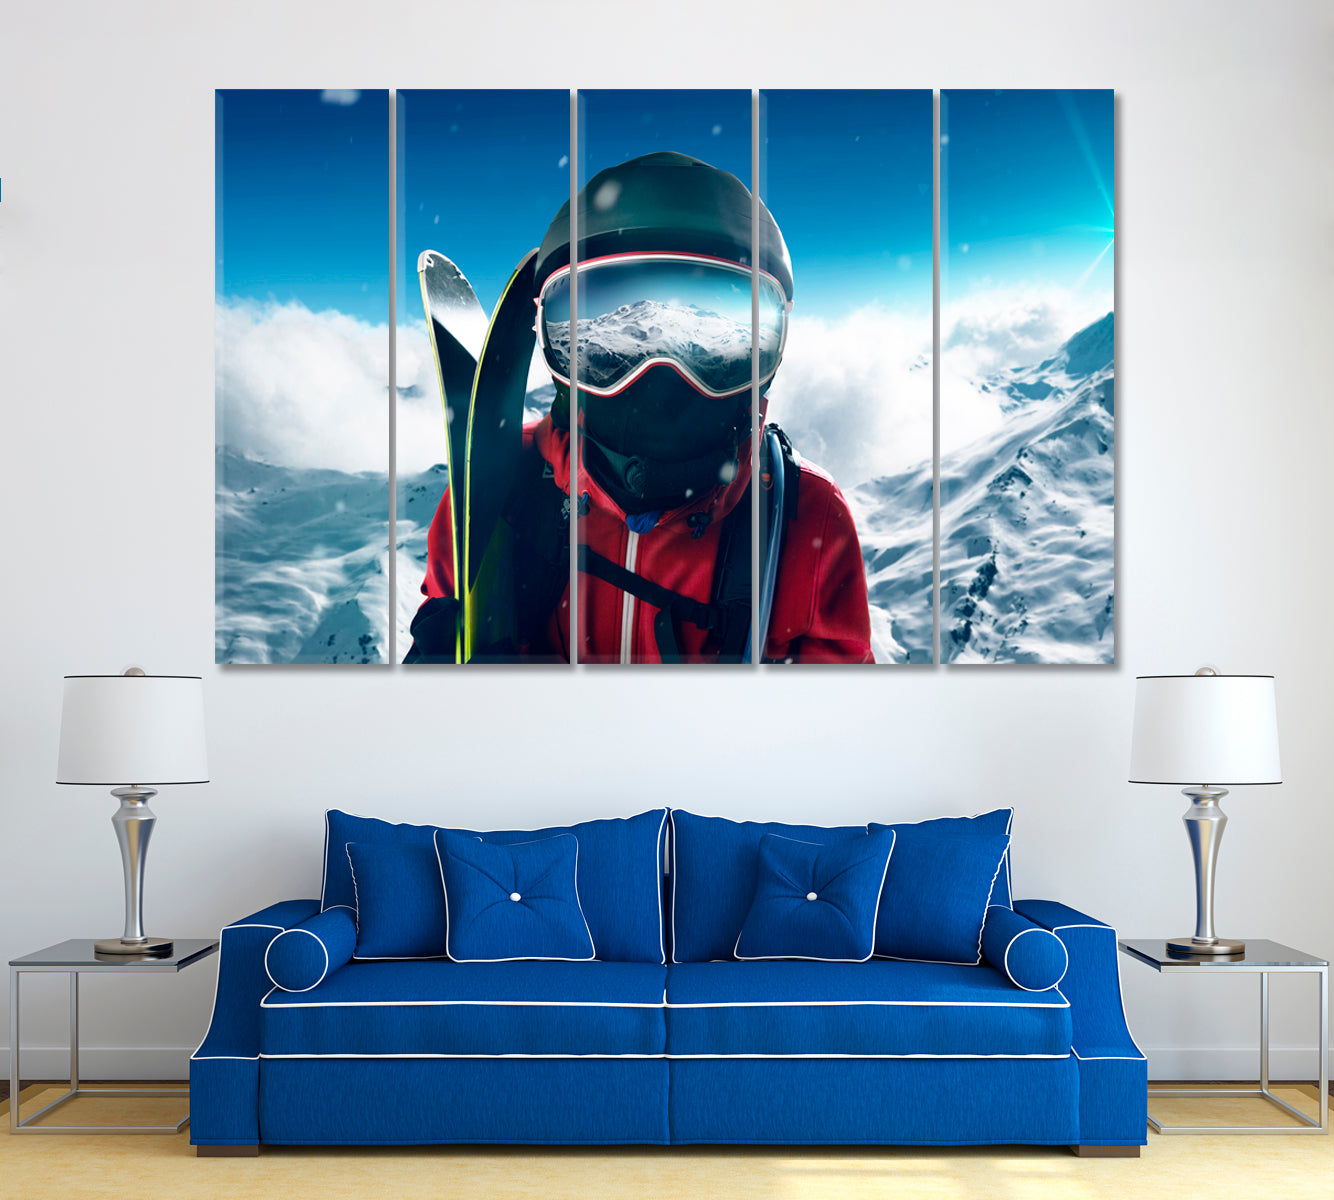 Skier in Front of Mountain Landscape Canvas Print ArtLexy 5 Panels 36"x24" inches 